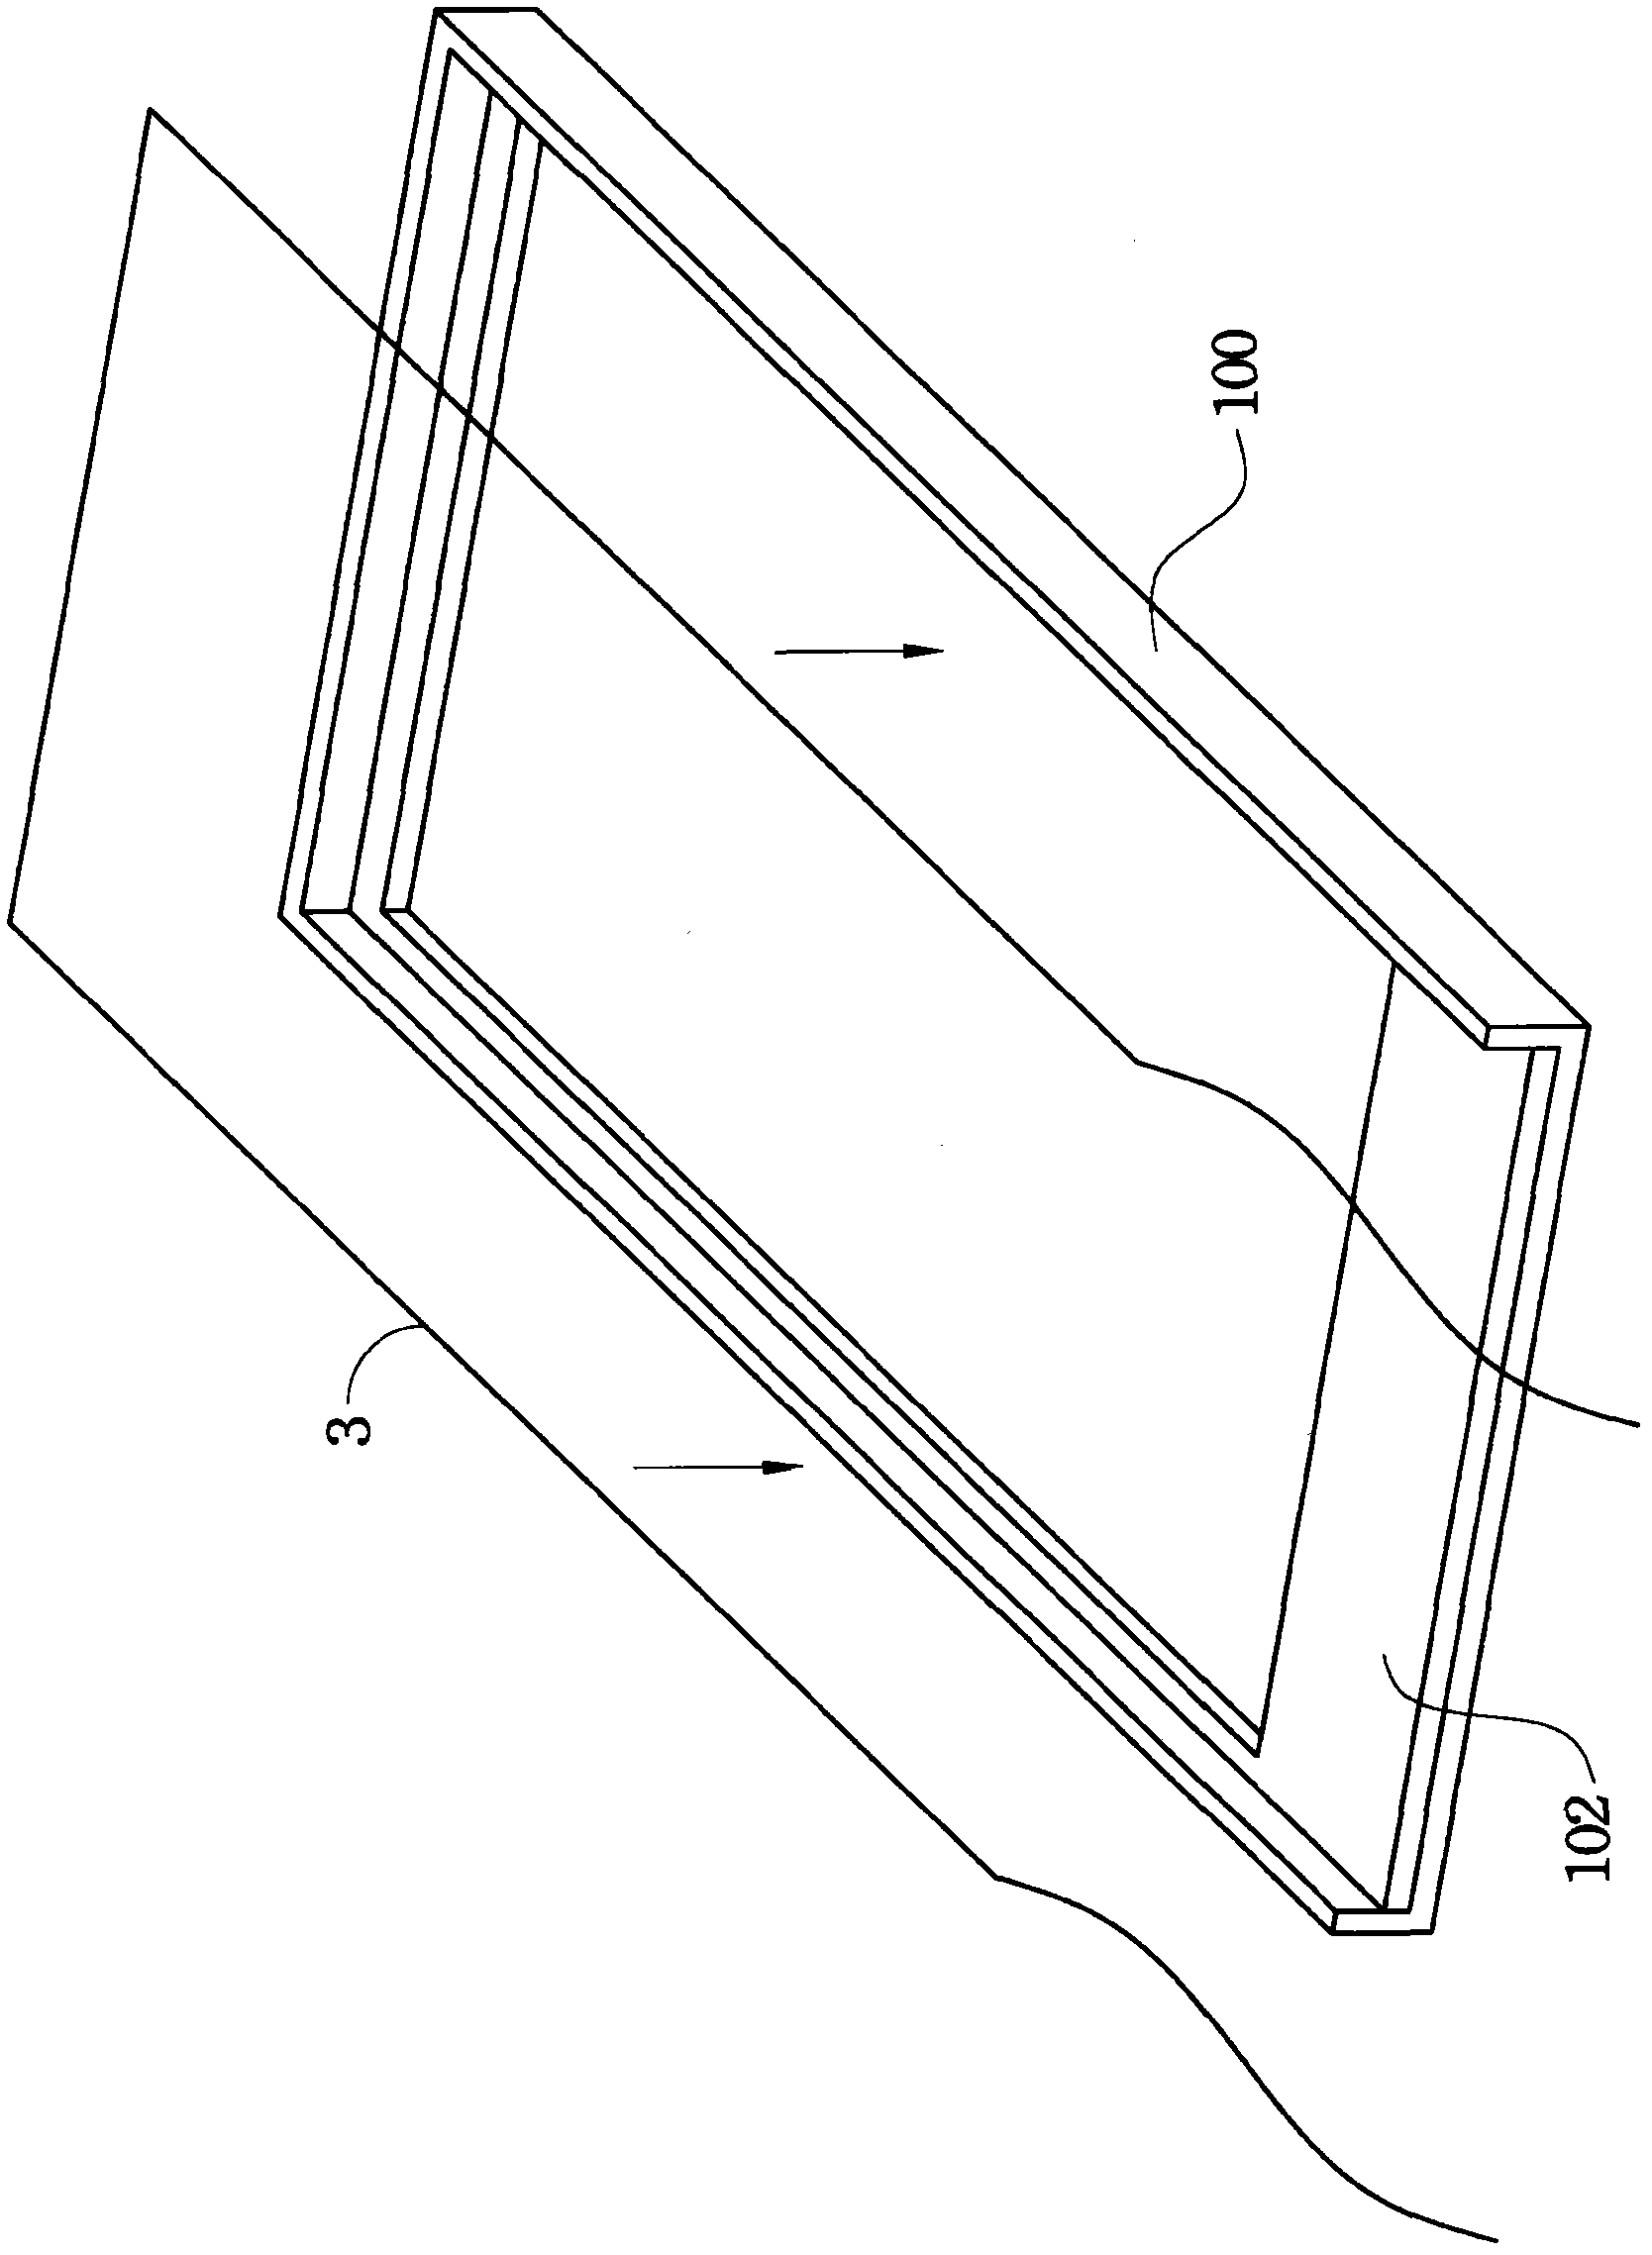 Display device, display device assembling method and display device dismounting device